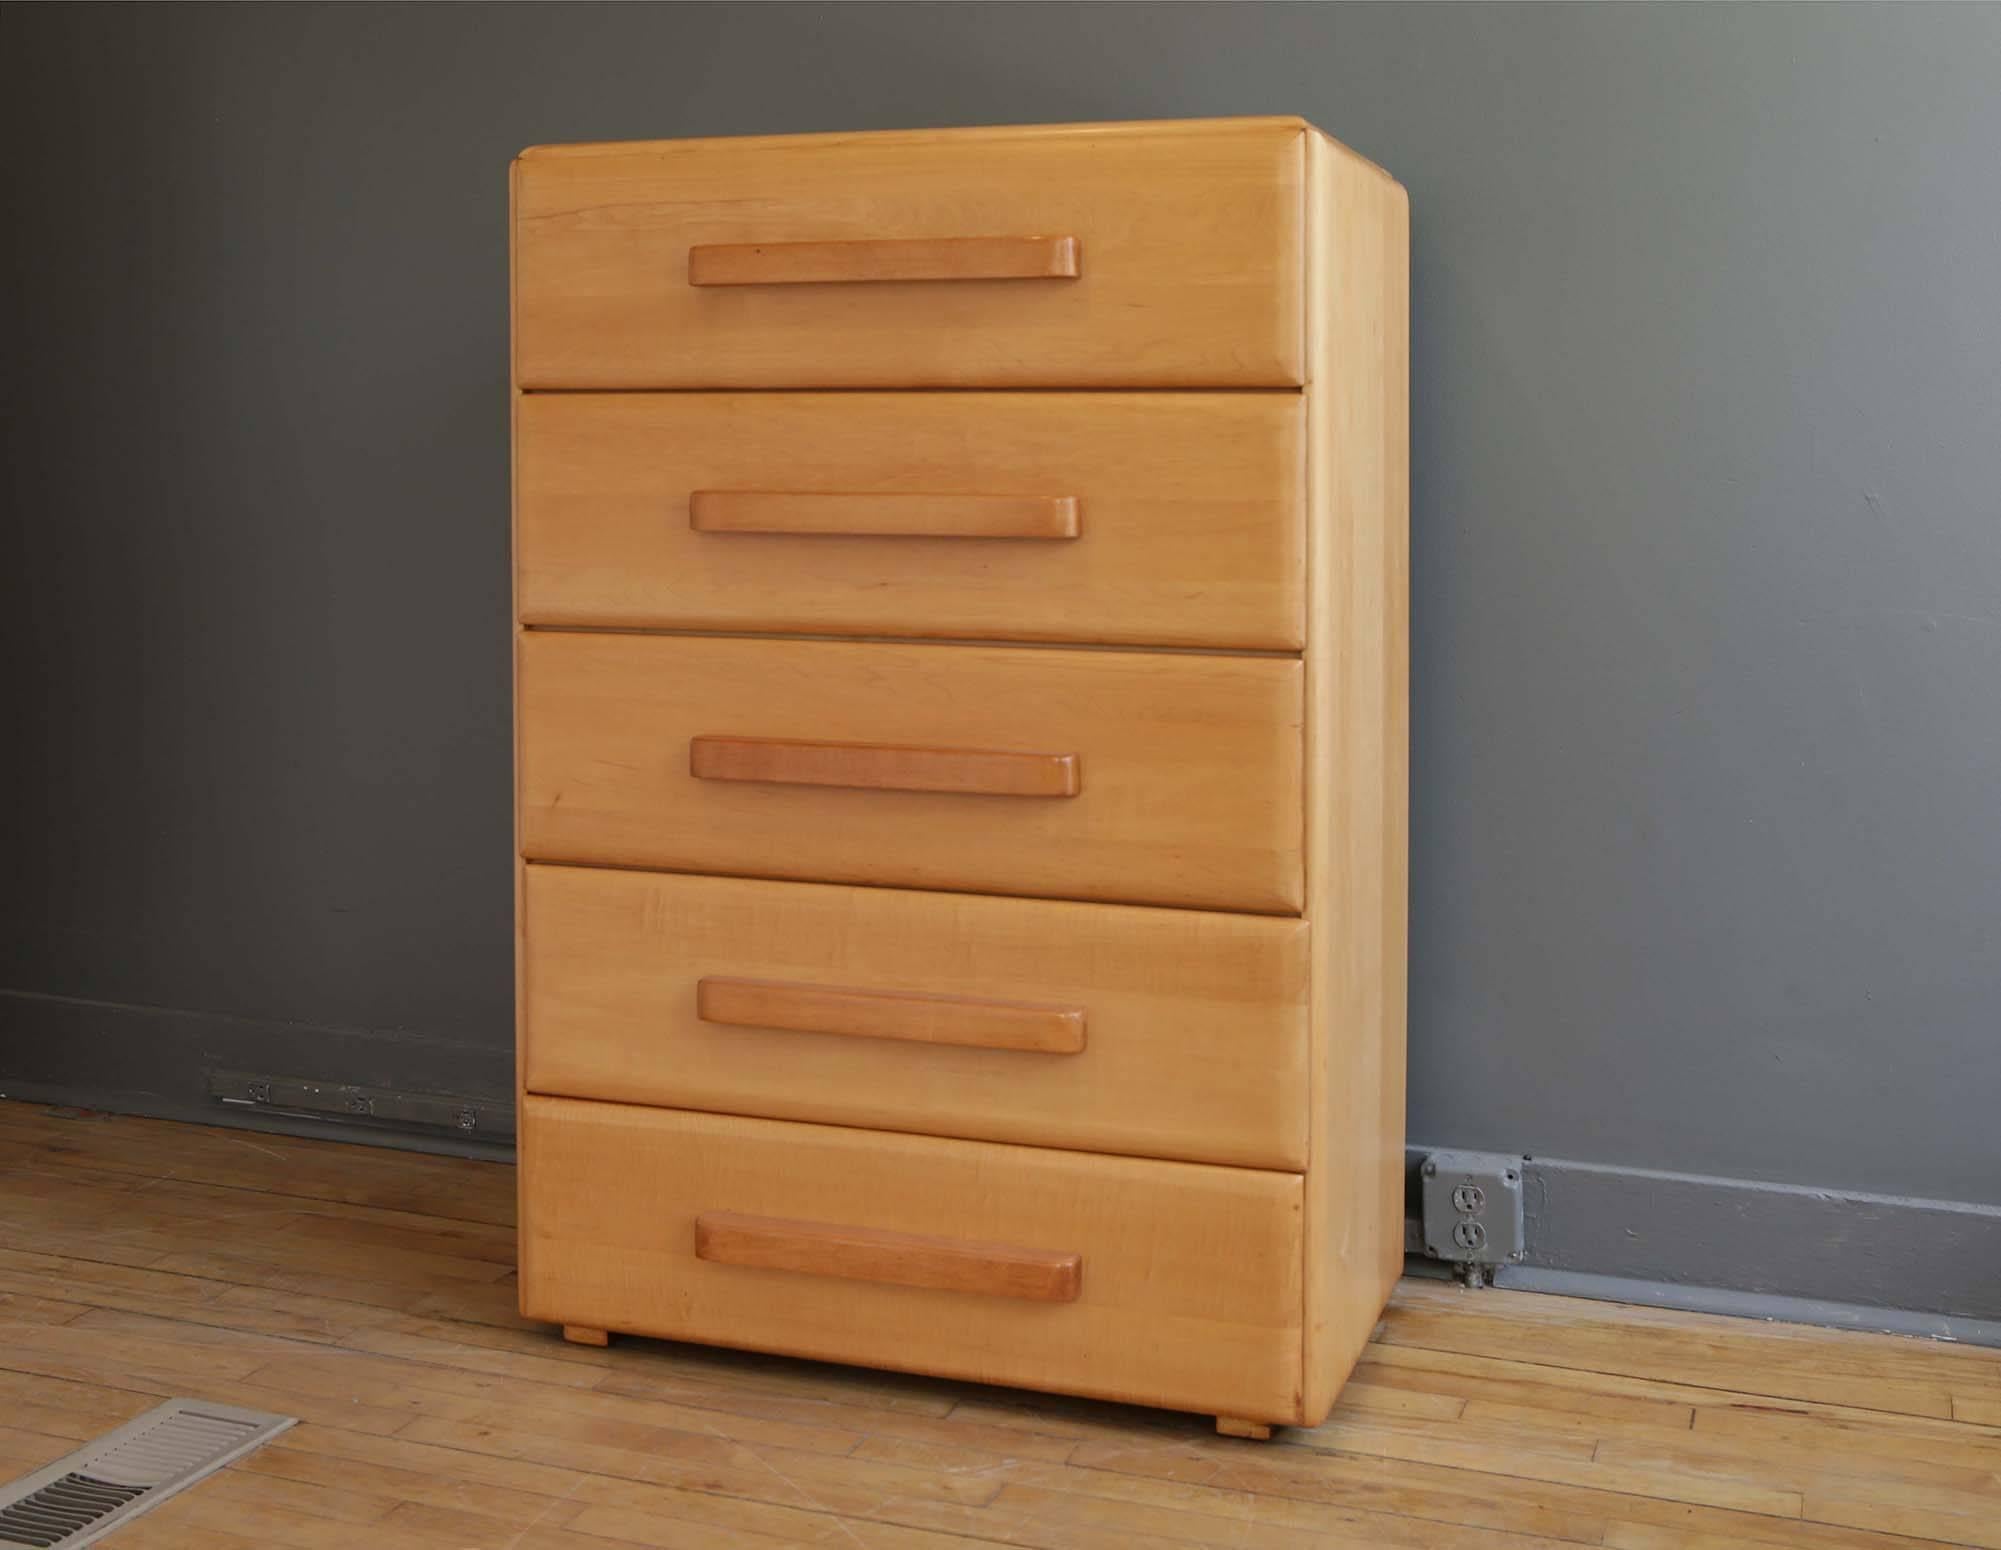 A tall chest of drawers or bureau designed by Russel Wright for Conant Ball, circa 1930s. Consisting of a solid maple case featuring five deep maple drawers each with a large sculptural handle. Recently refurbished in a natural finish and in